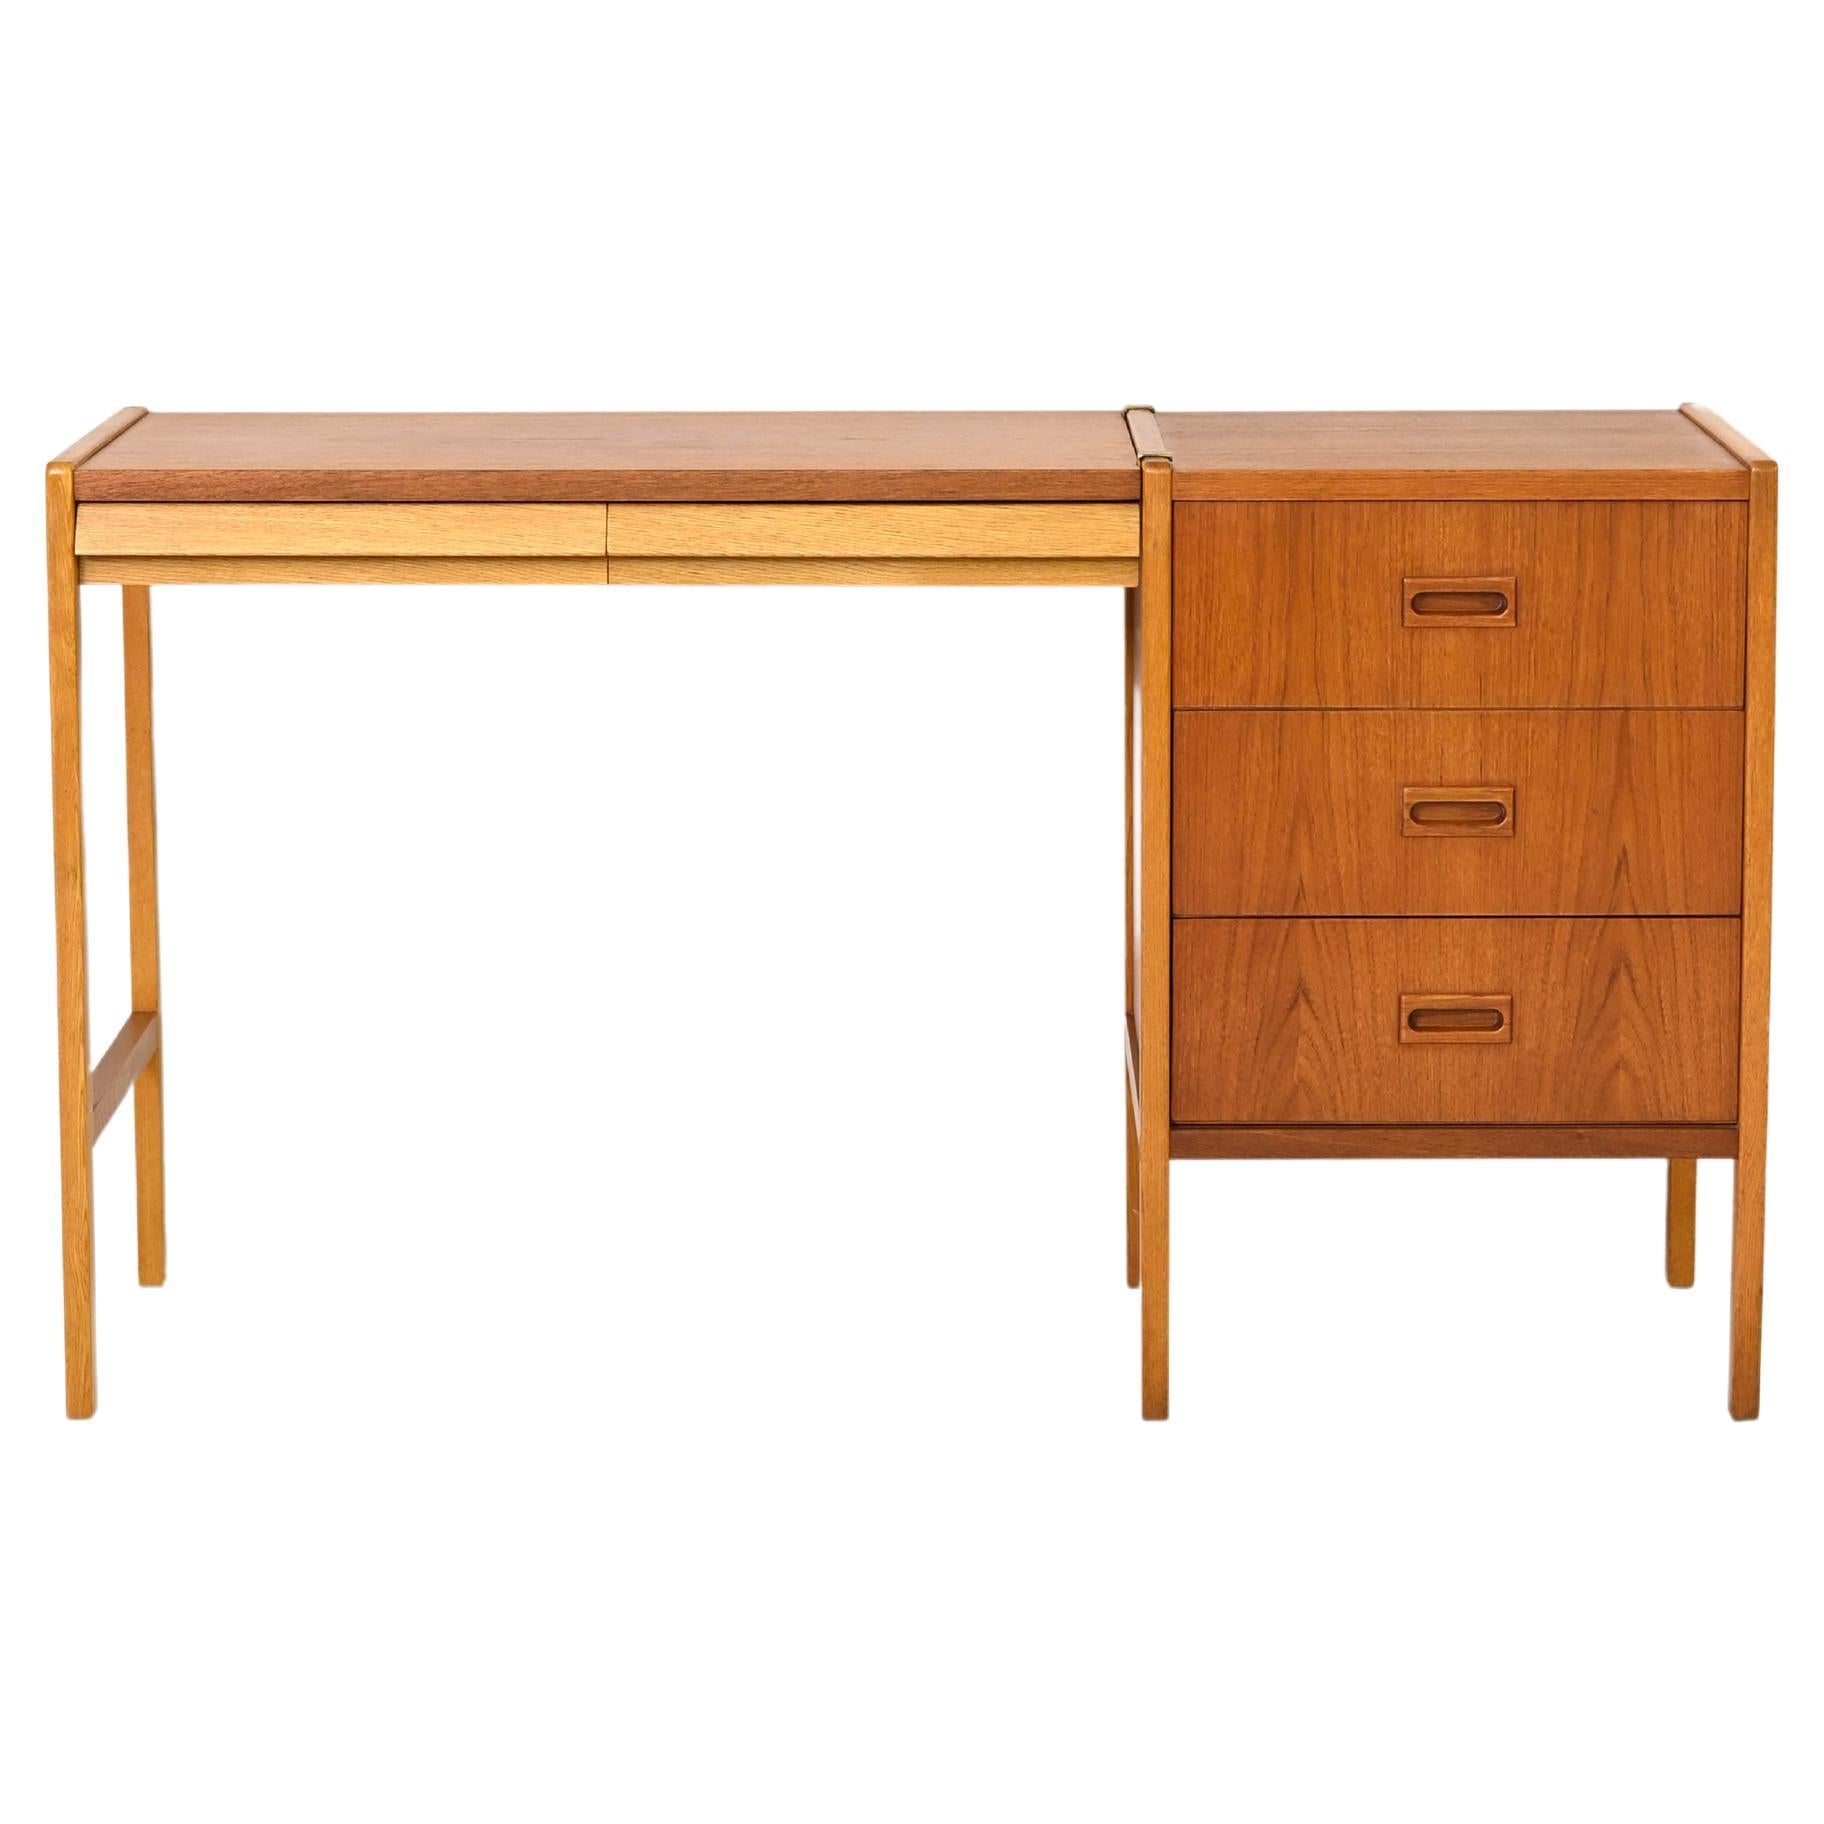 Bodafors Signature Desk with Drawers